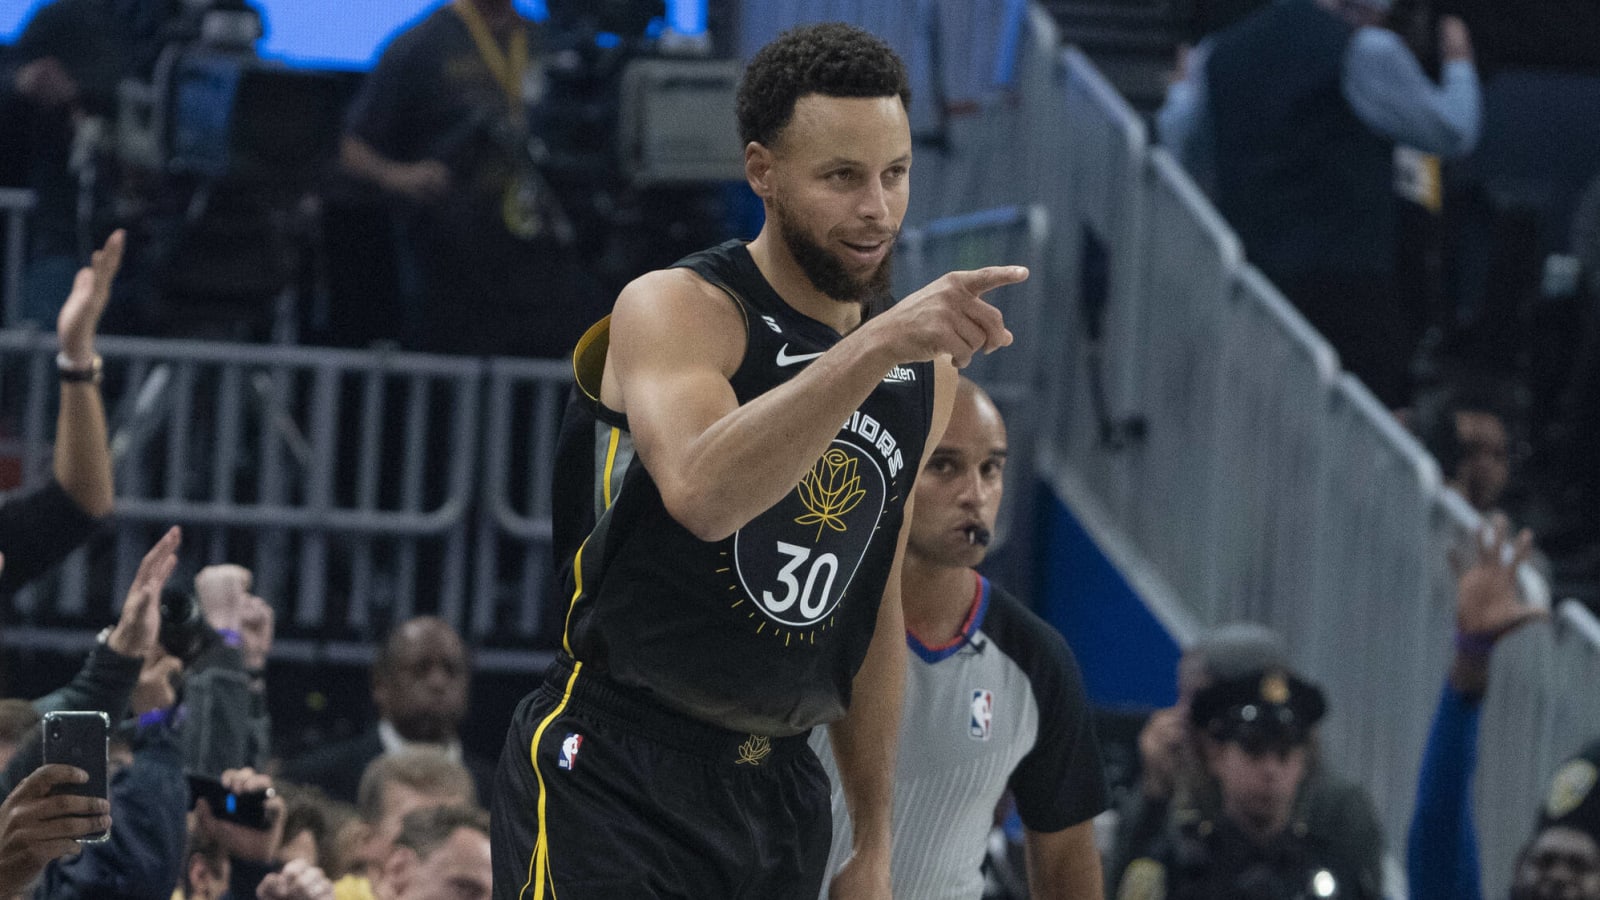 Watch: Steph Curry drills shot from beyond half-court, but it didn't count